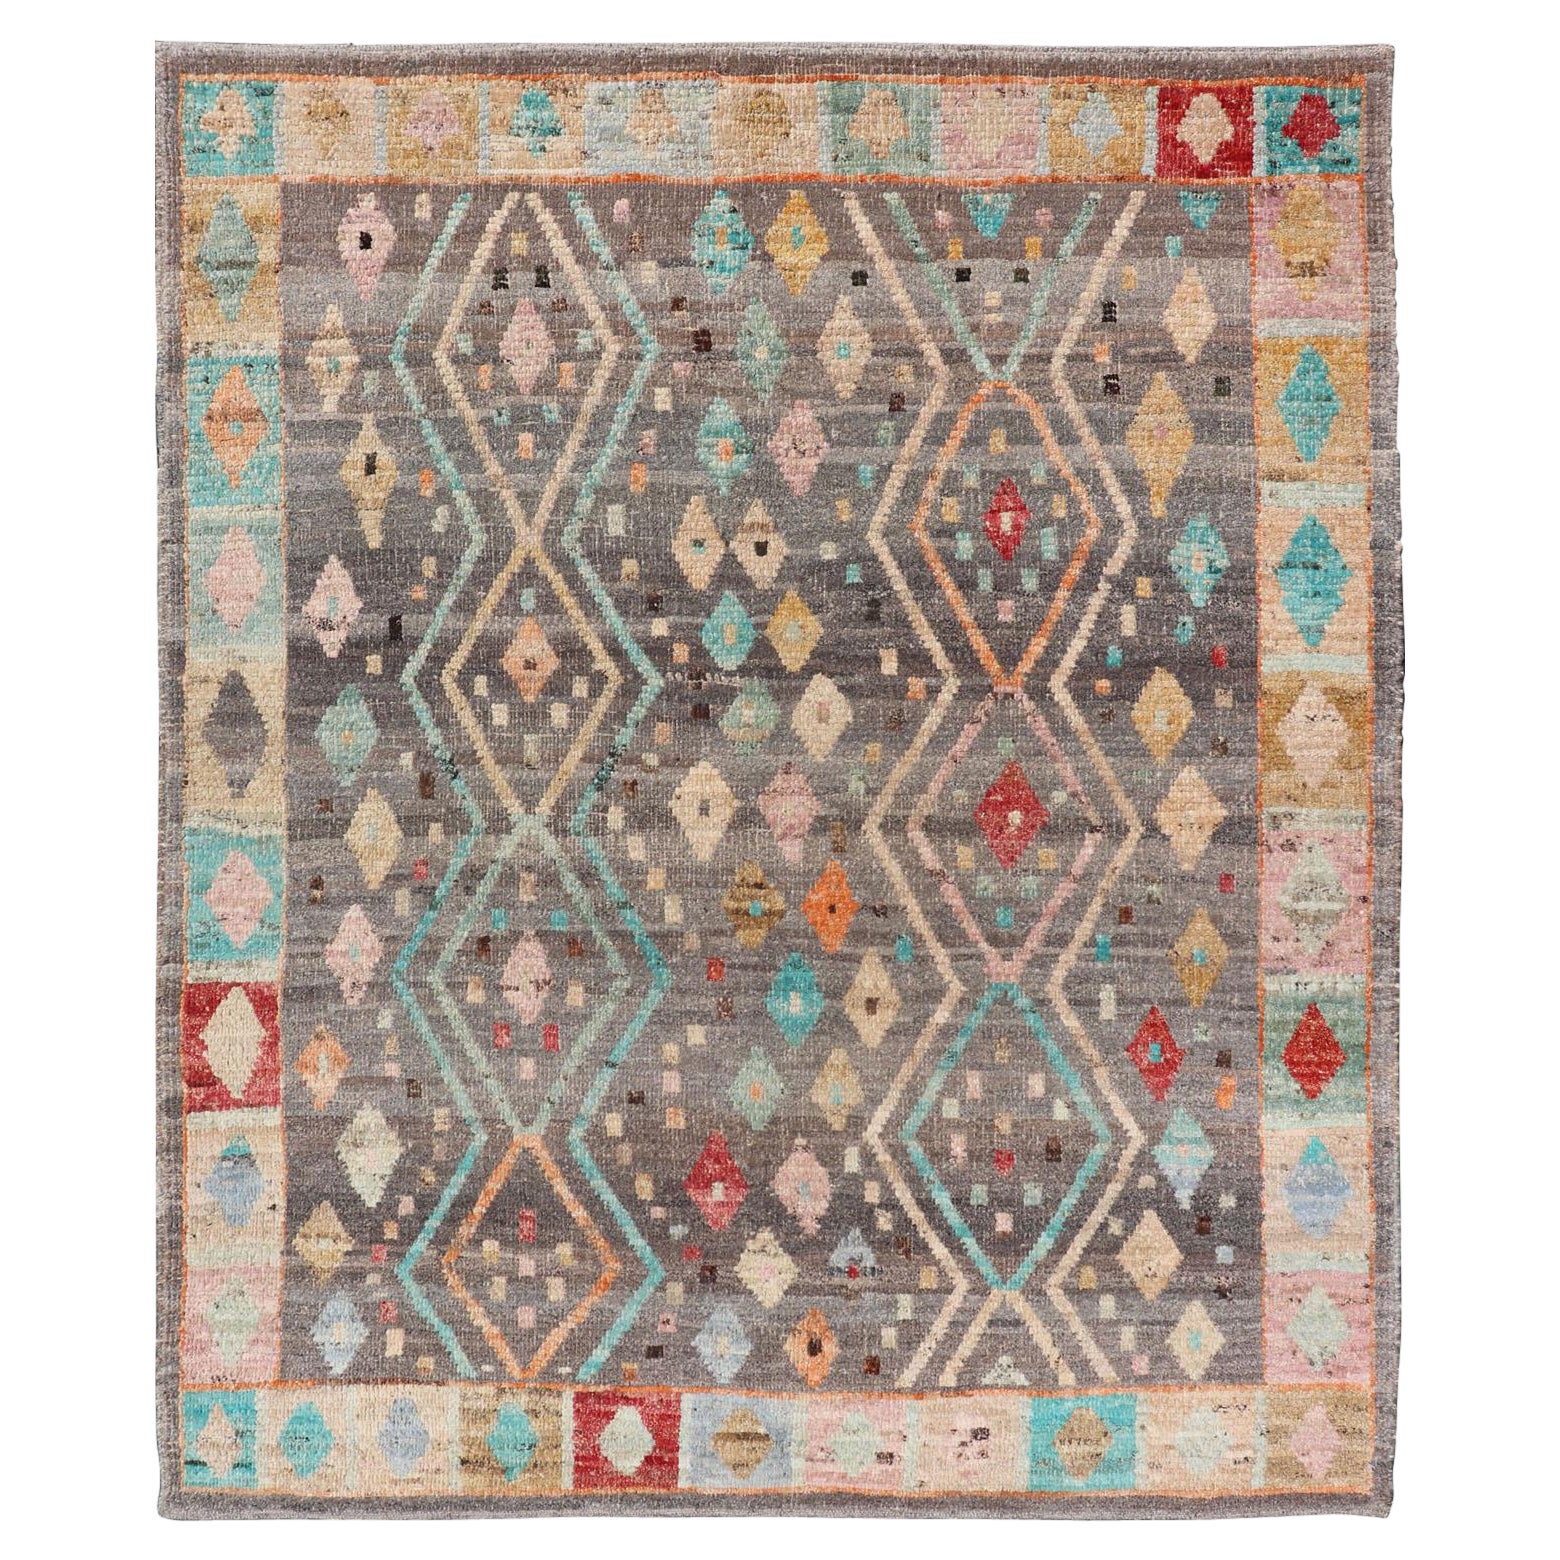 Modern Diamonds and Tribal Design Rug in Gray Background and Vivid Colors